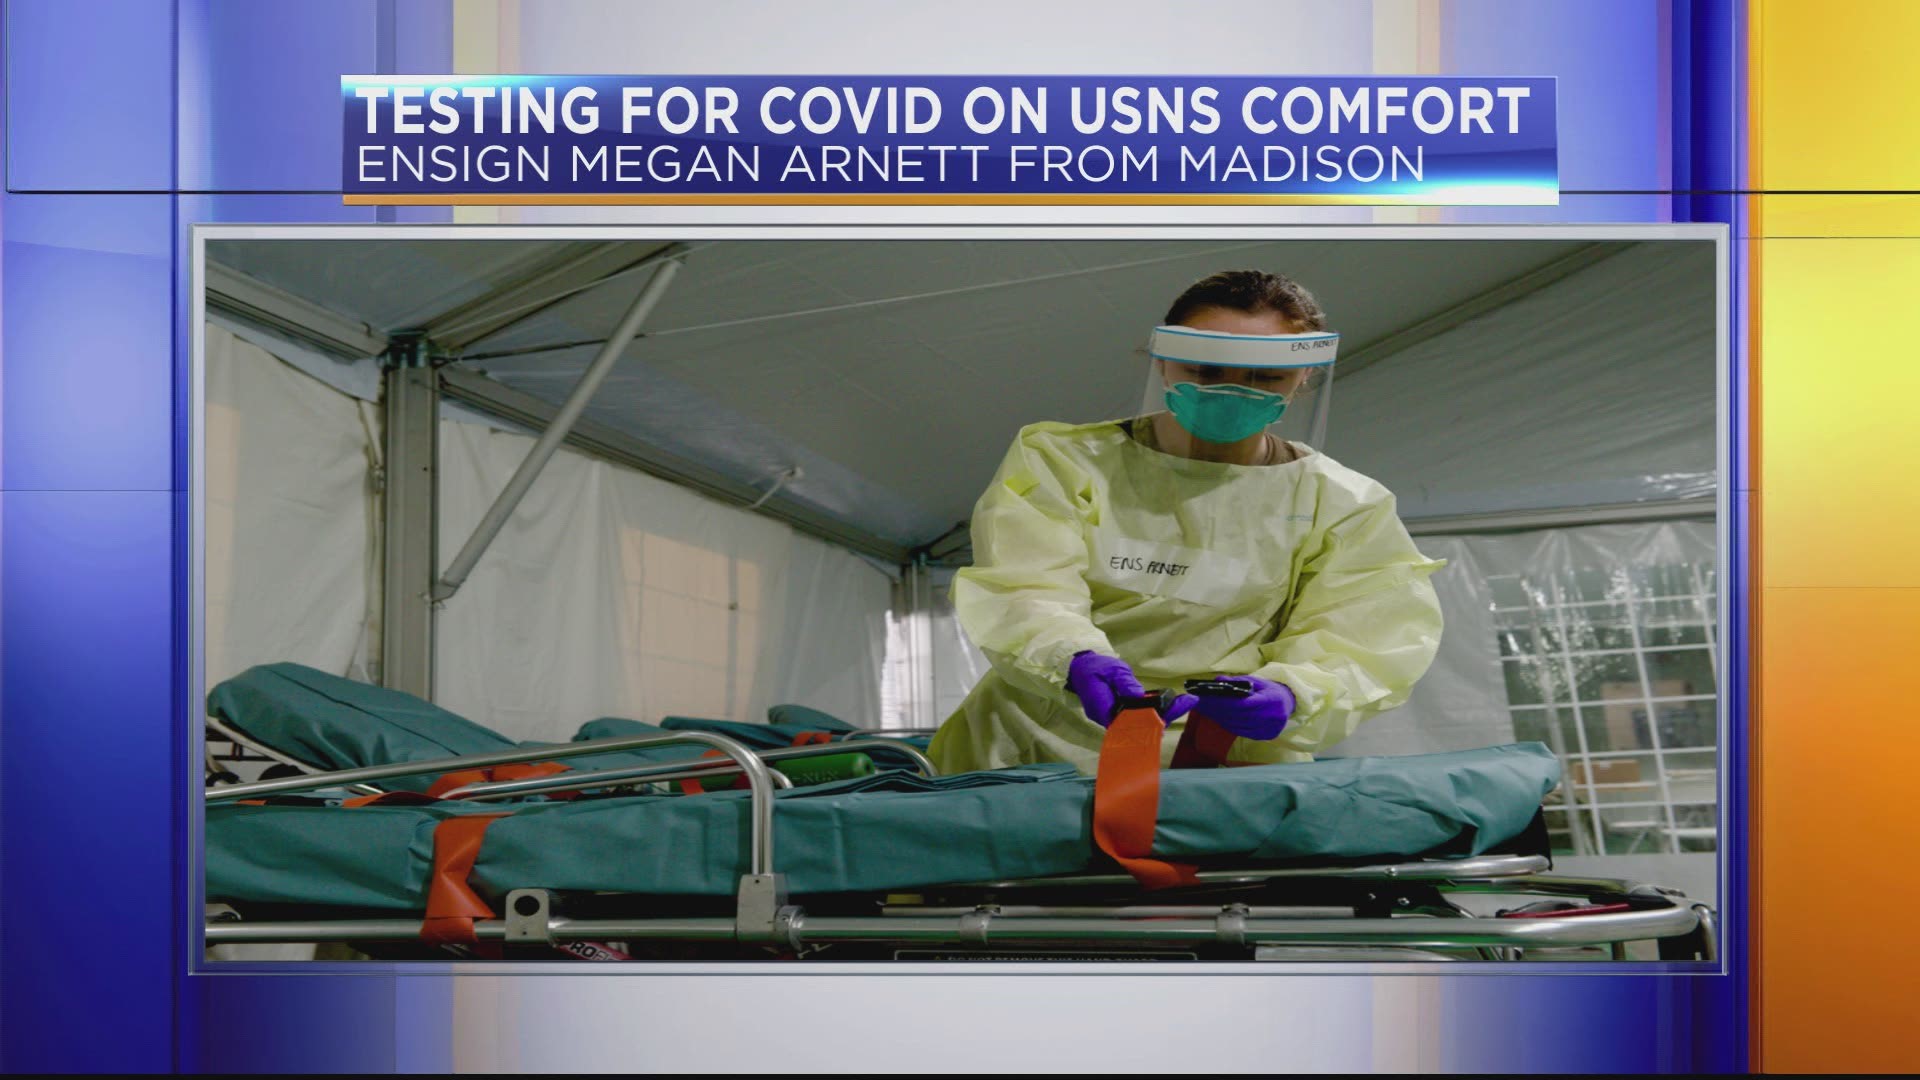 A local sailor is part of the team aboard the USNS Comfort helping to treat patients in New York.